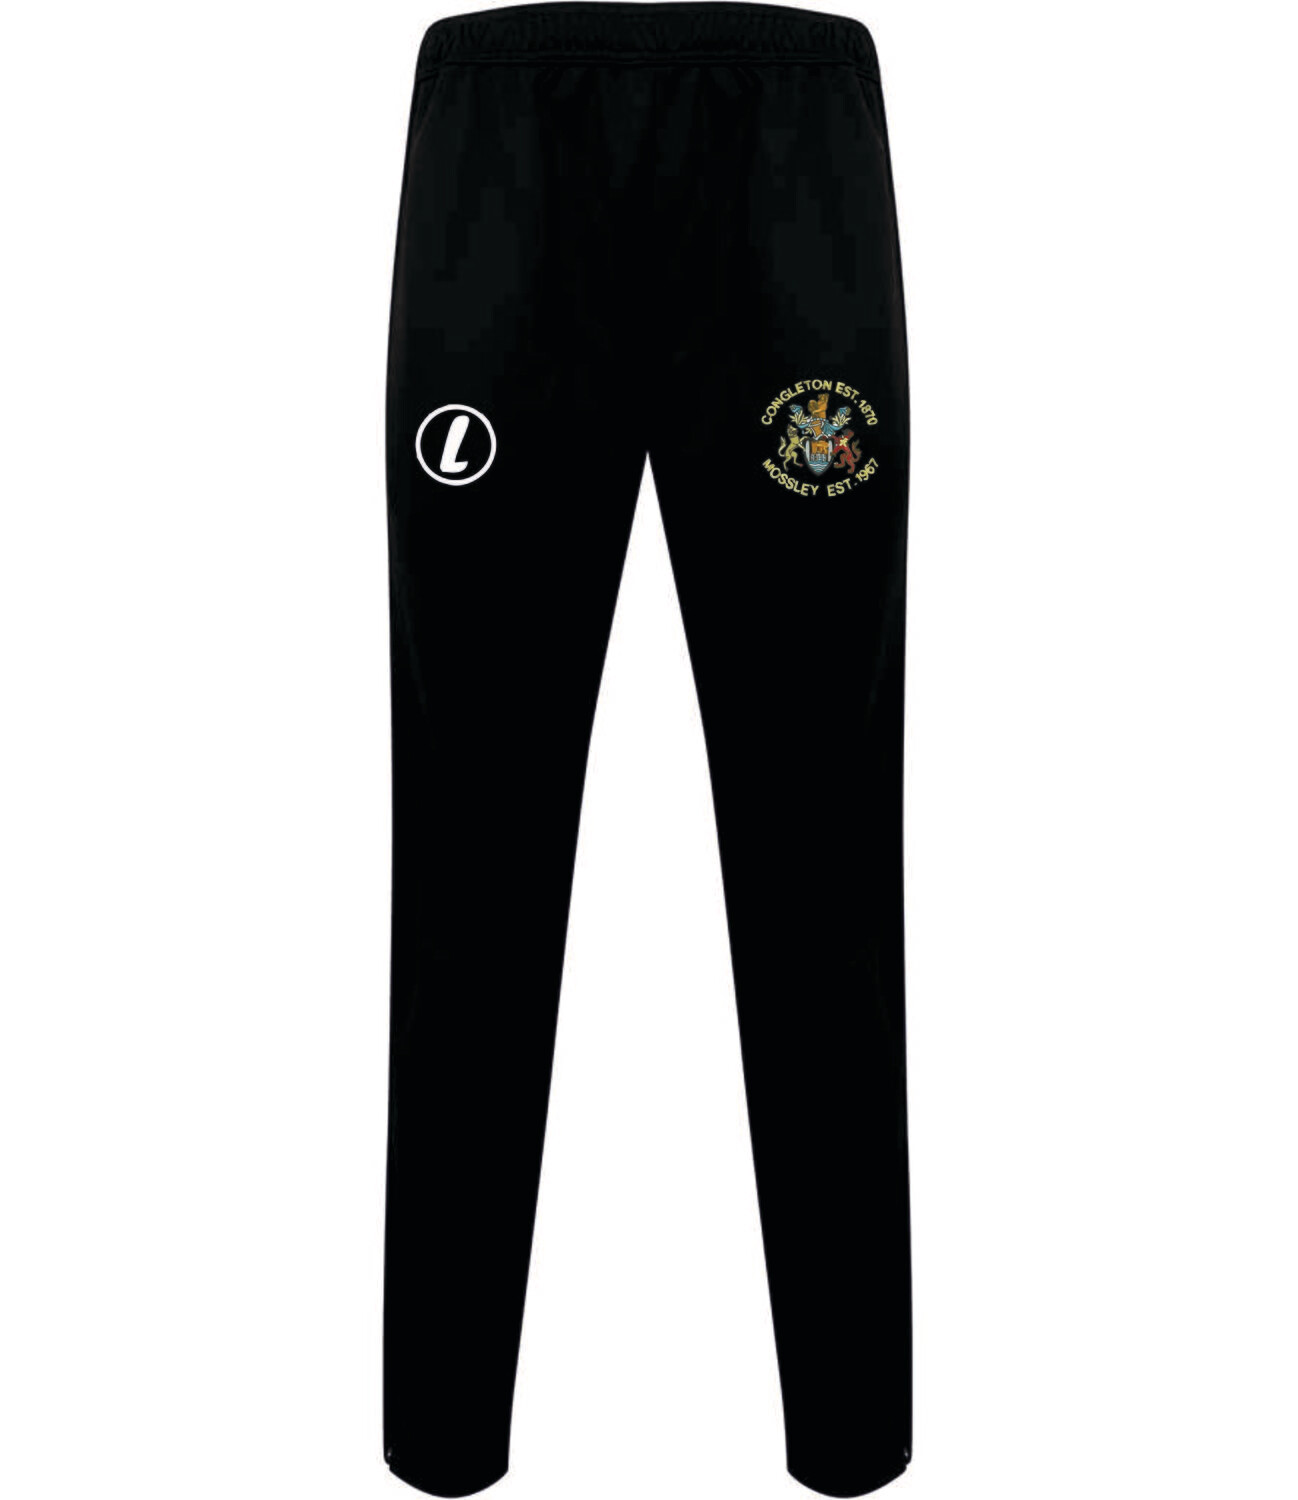 Congleton and Mossley Cricket Pro Training Trouser